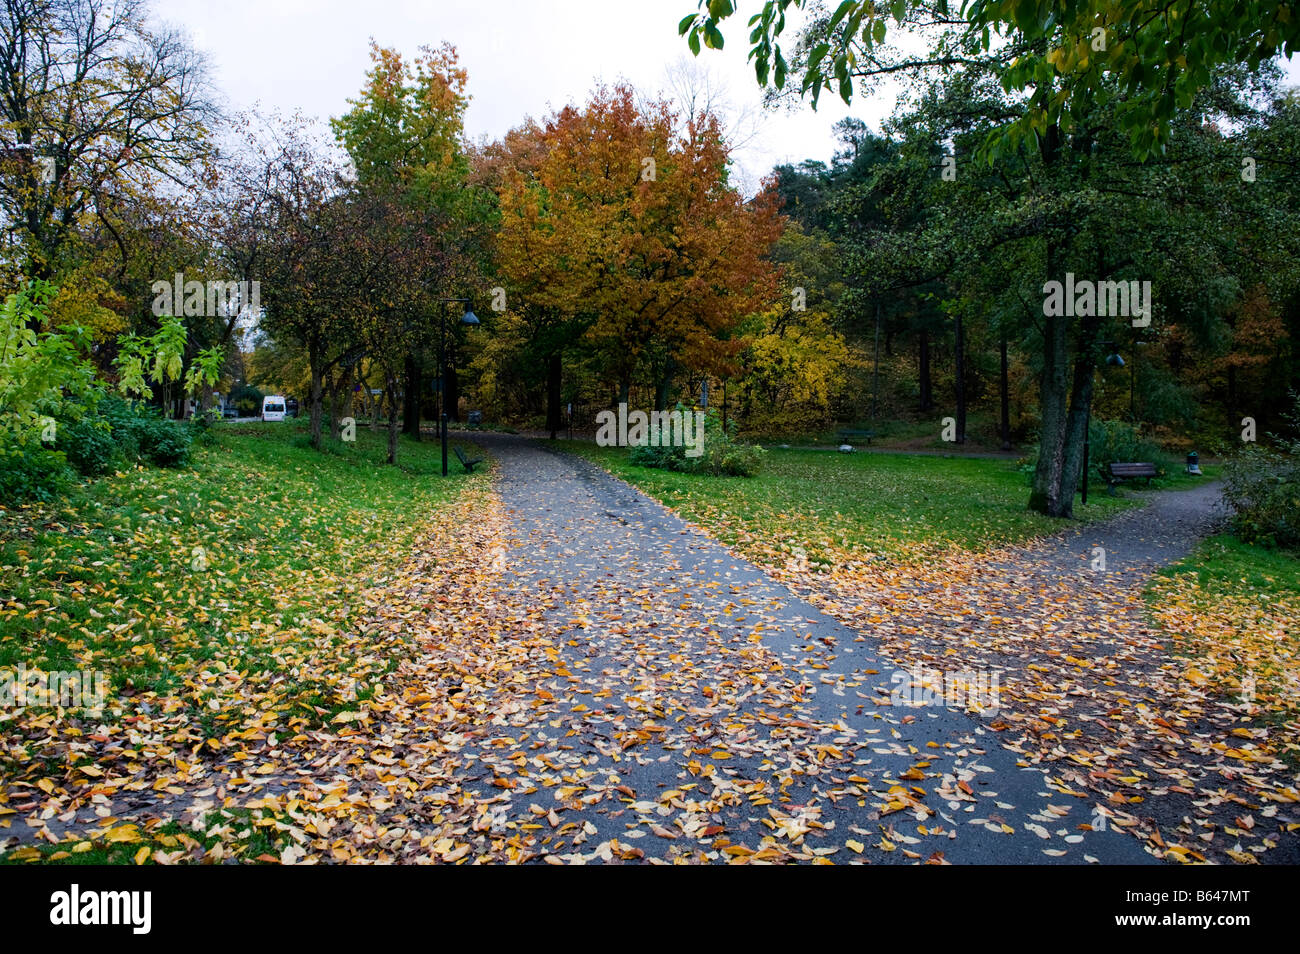 Grondal High Resolution Stock Photography and Images - Alamy